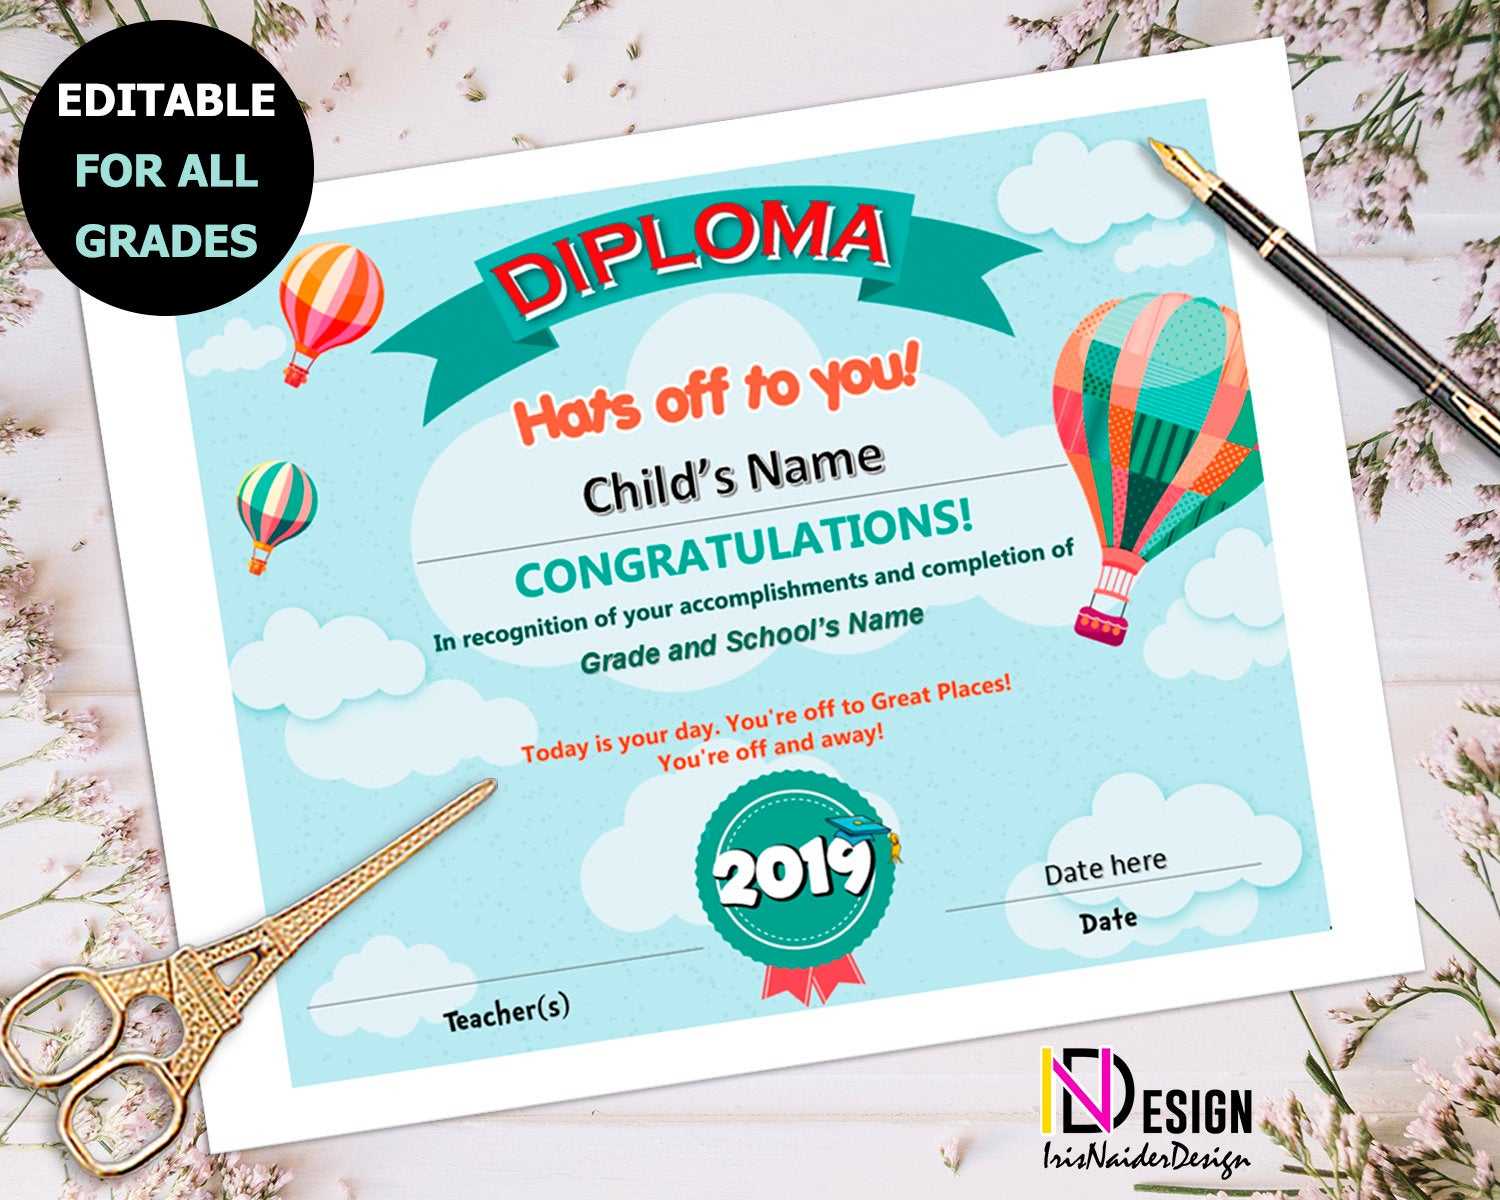 Diploma, Oh The Places You'll Go Inspired Certificate, Kindergarten, Pre K,  1St Grade, Graduation, 2Nd Grade, 3Rd Grade, 4Th Grade,5Th Grade Within 5Th Grade Graduation Certificate Template